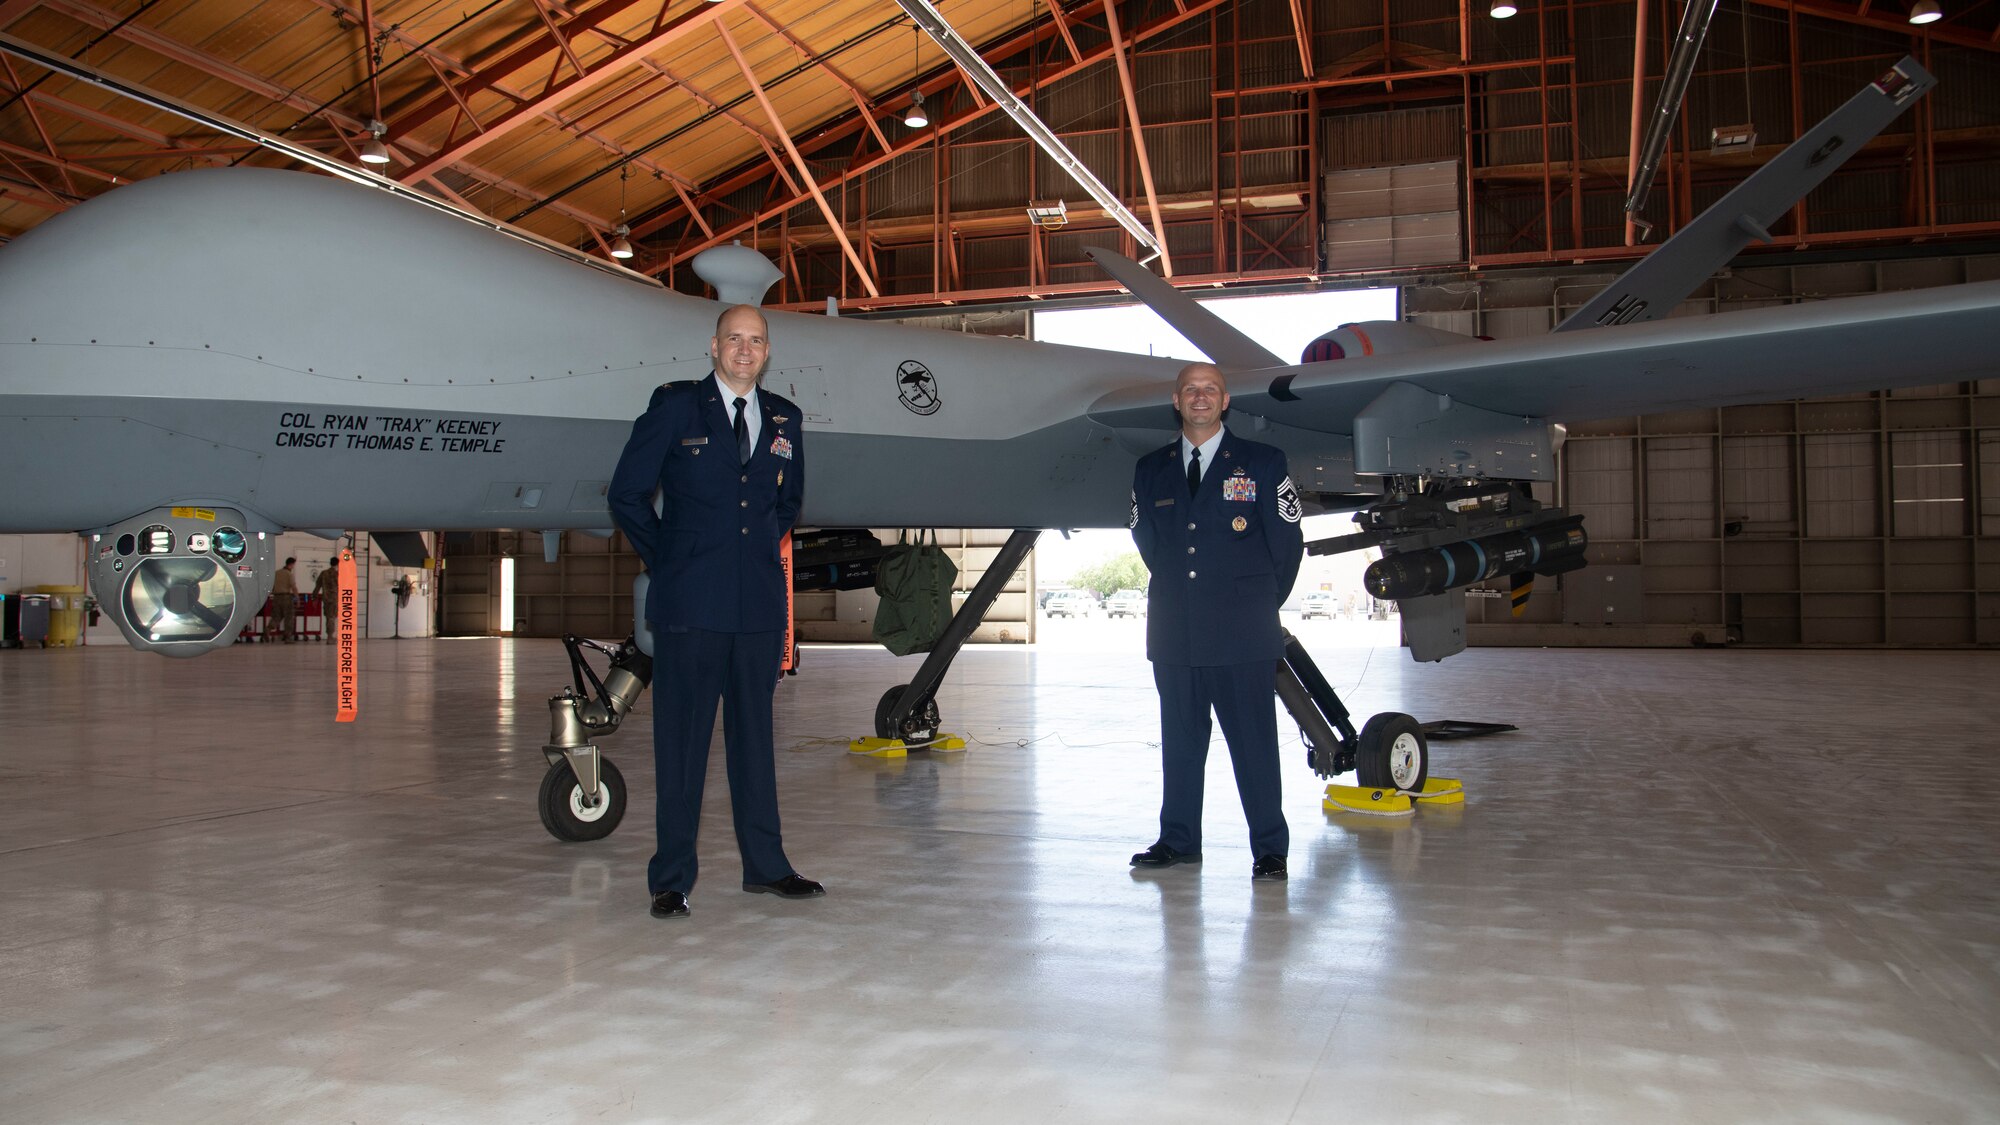 Col. Ryan Keeney, 49th Wing commander and Chief Master Sgt. Thomas Temple, 49th WG command chief, pose in front of an MQ-9 Reaper, May 21, 2020, on Holloman Air Force Base, N.M. Keeney assumed command of the 49th WG during a formal ceremony. (U.S. Air Force photo by Tech. Sgt. BreeAnn Sachs)